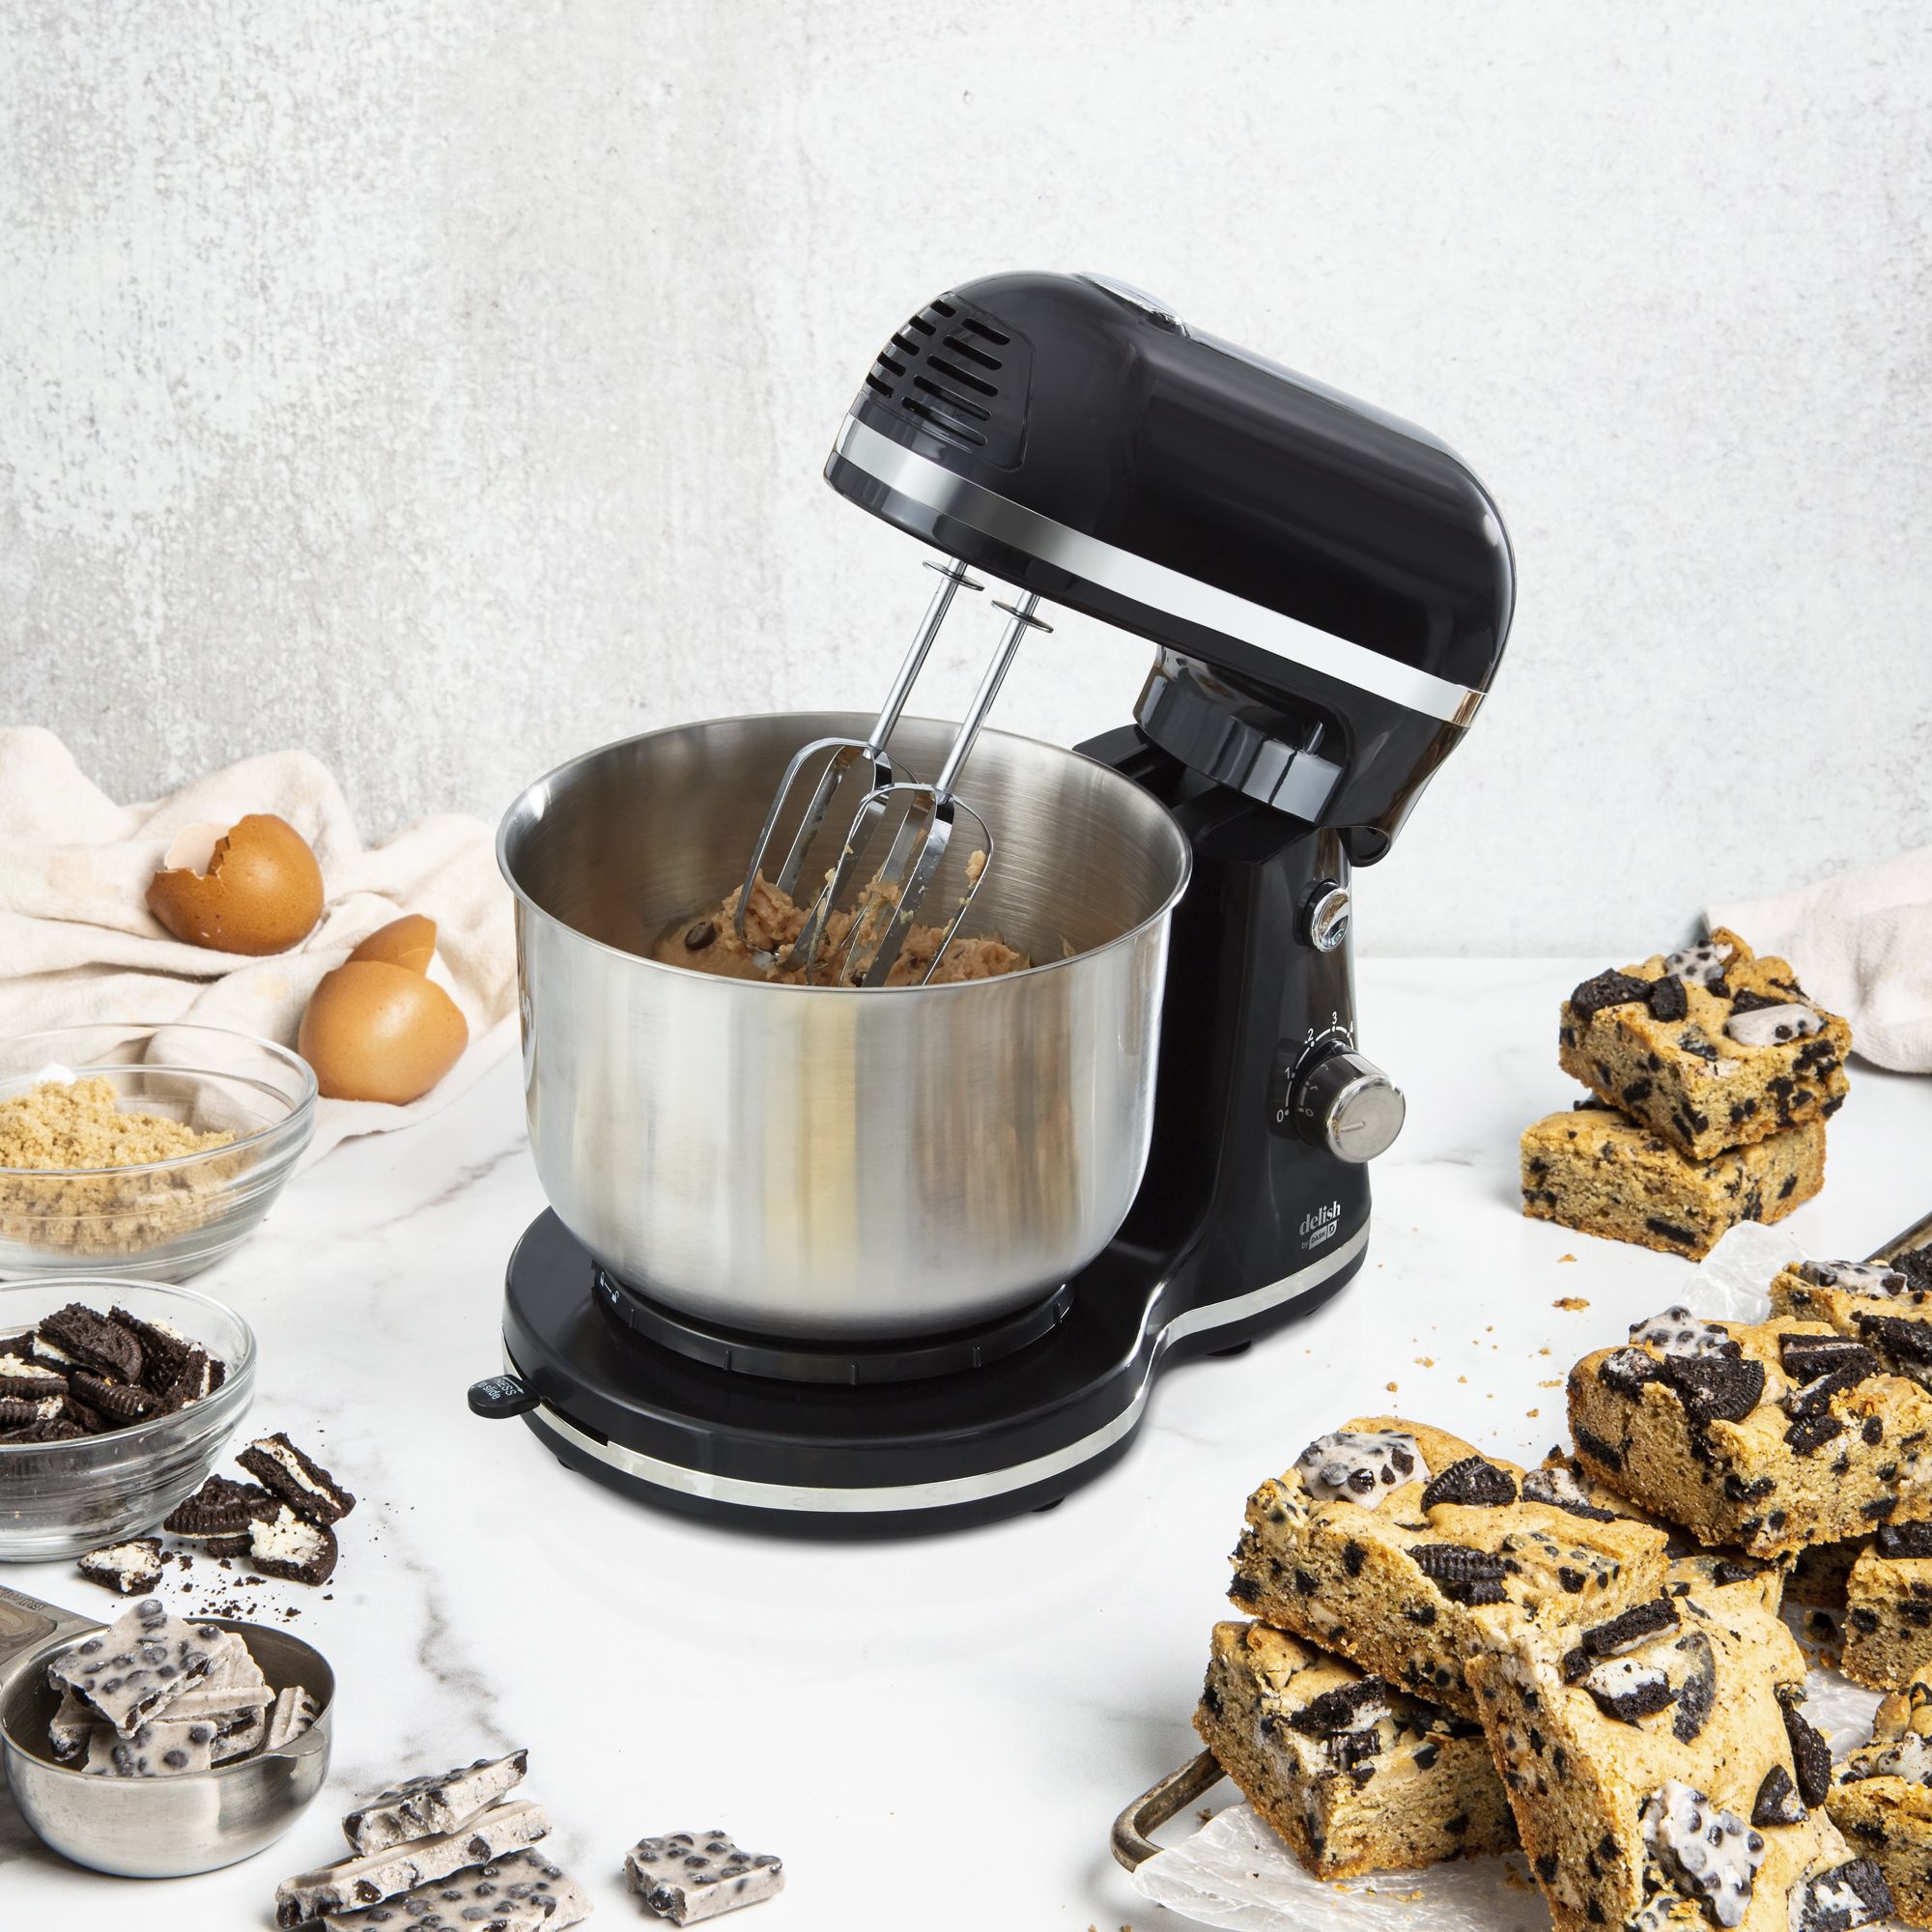 Best breakfast appliance deals: Get Dash products up to 42% off